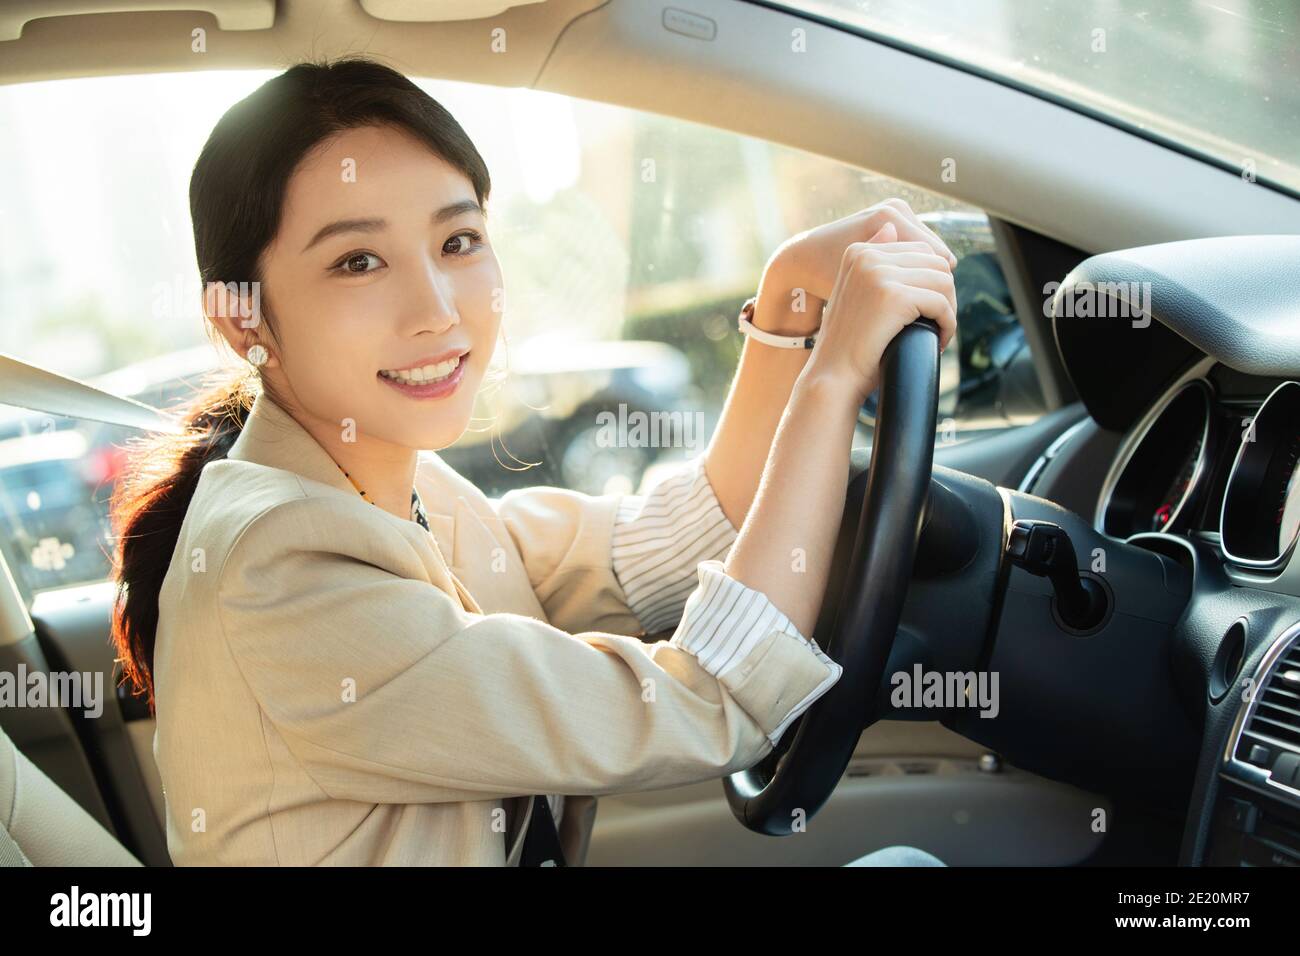 Happy young woman driving a car Stock Photo